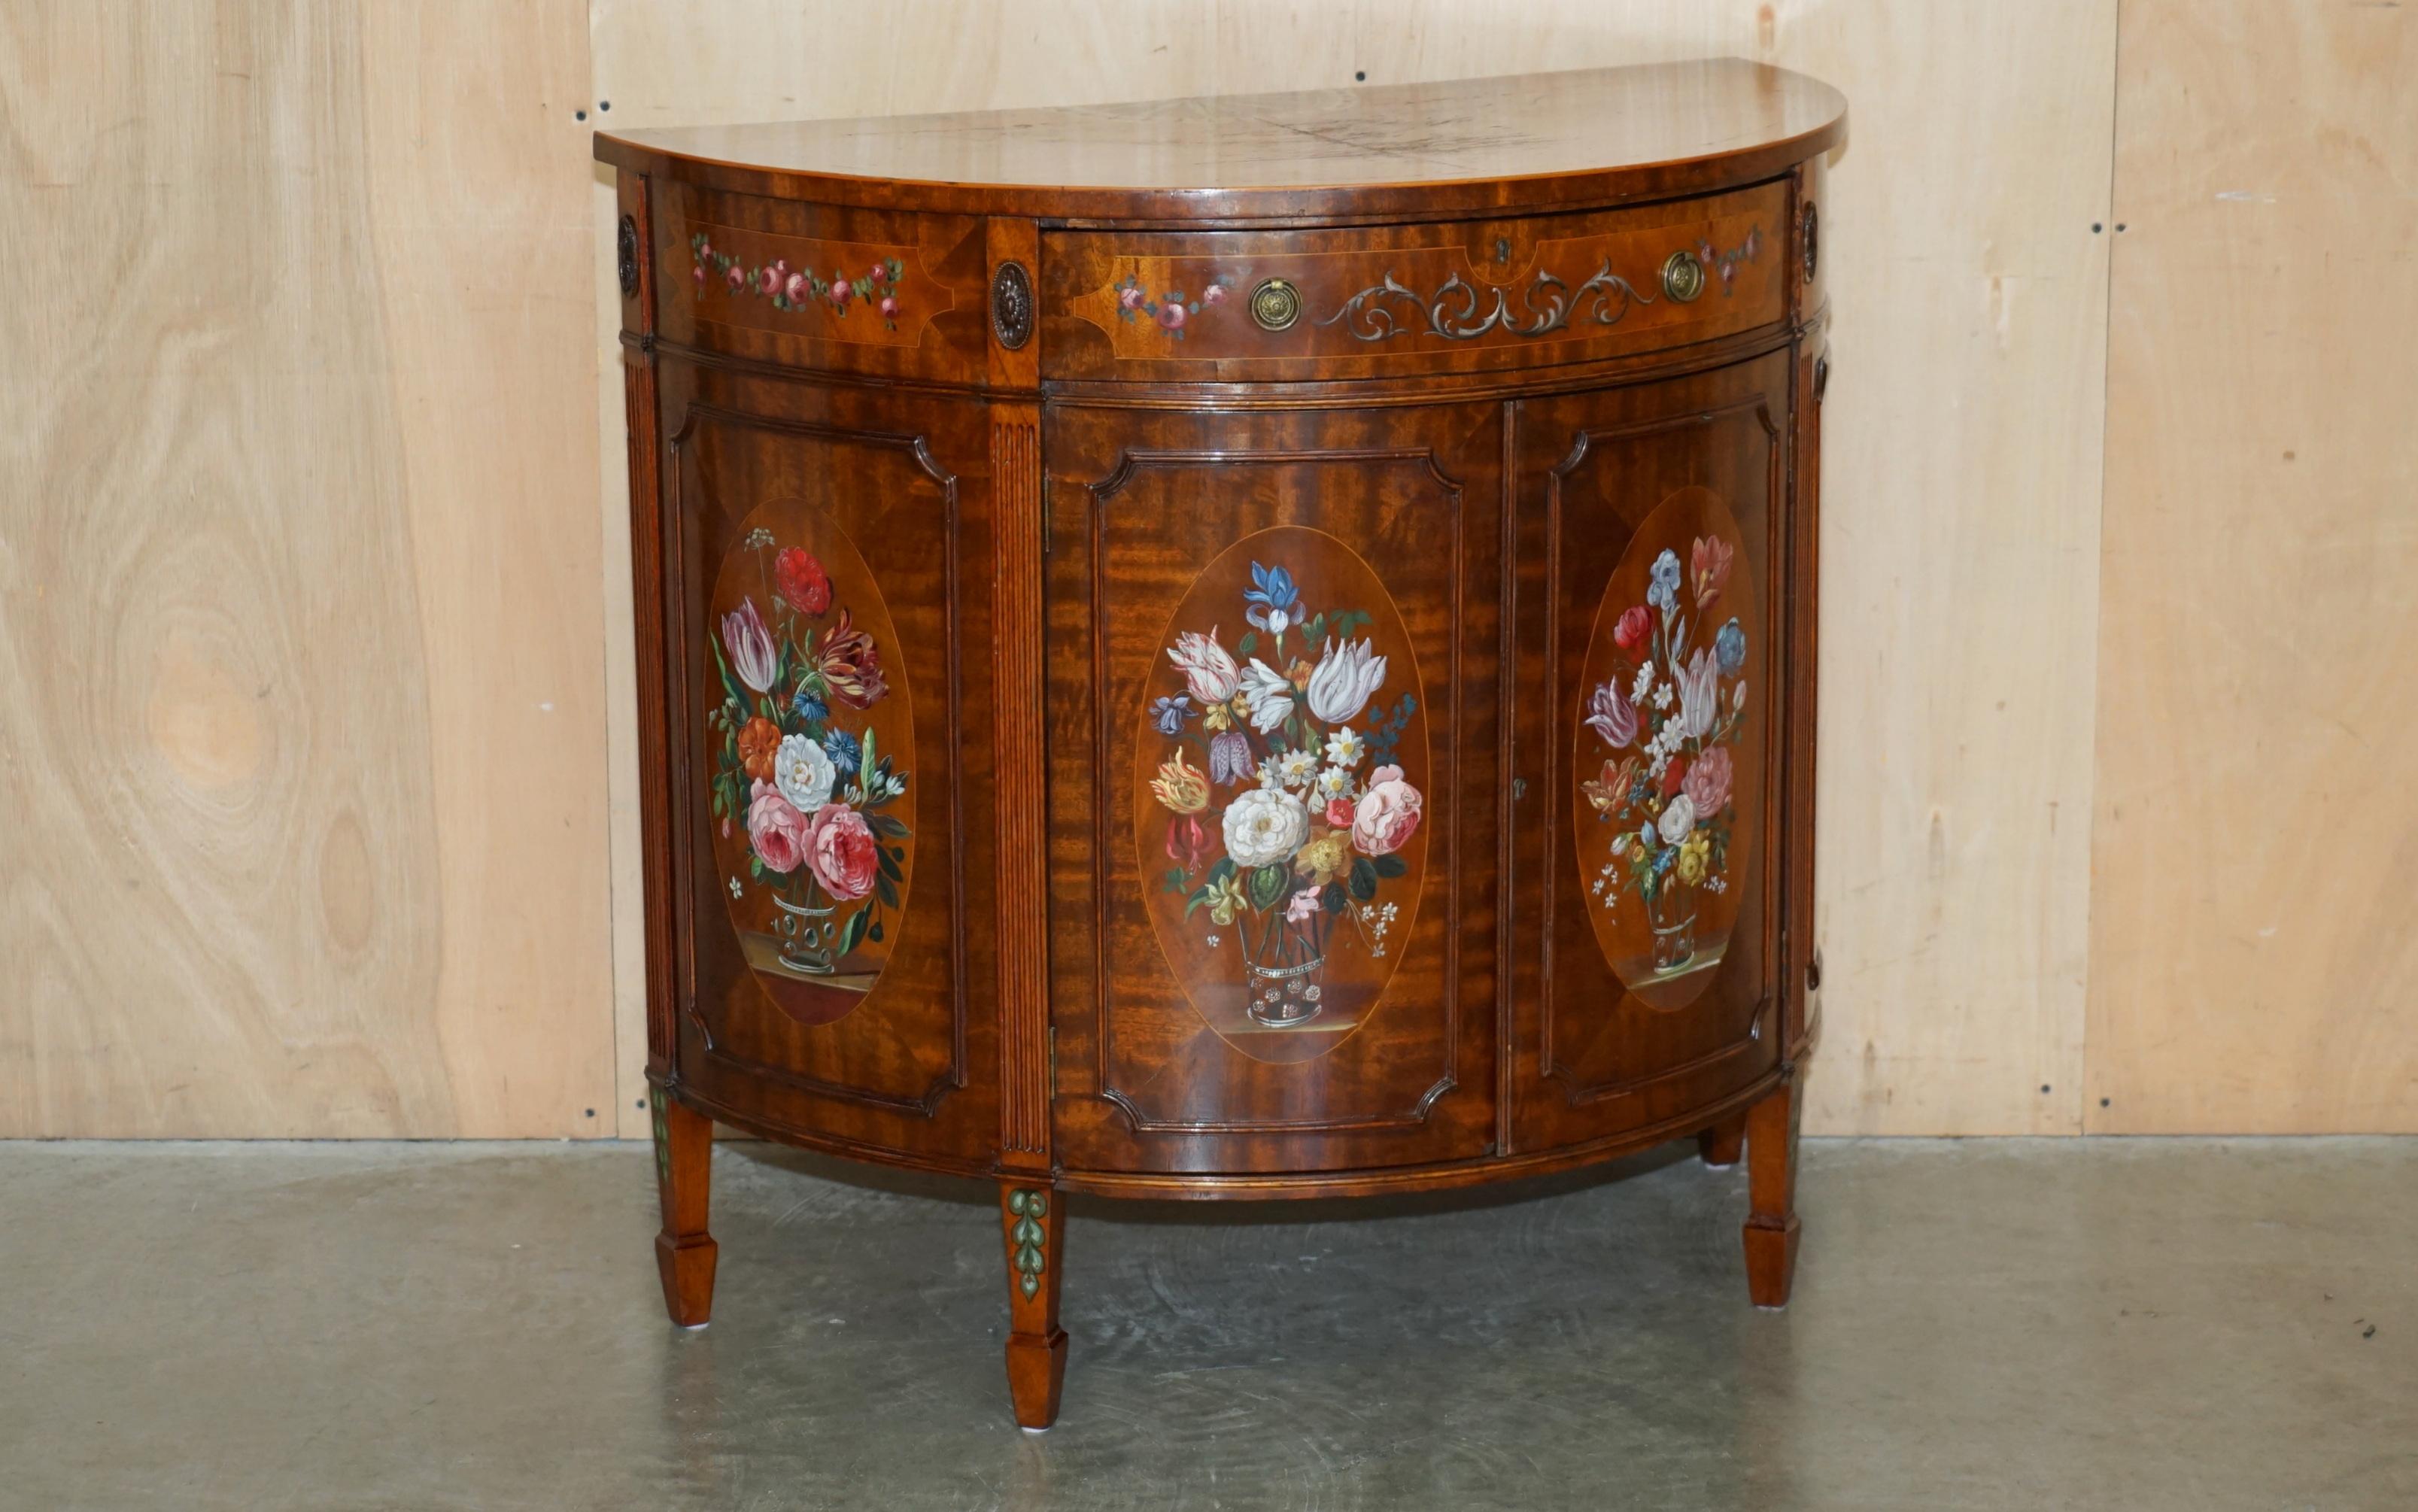 Royal House Antiques

Royal House Antiques is delighted to offer for sale this exquisite pair of hand made in England Demi Lune sideboards with Adams Sheraton Revival style paintings 

Please note the delivery fee listed is just a guide, it covers